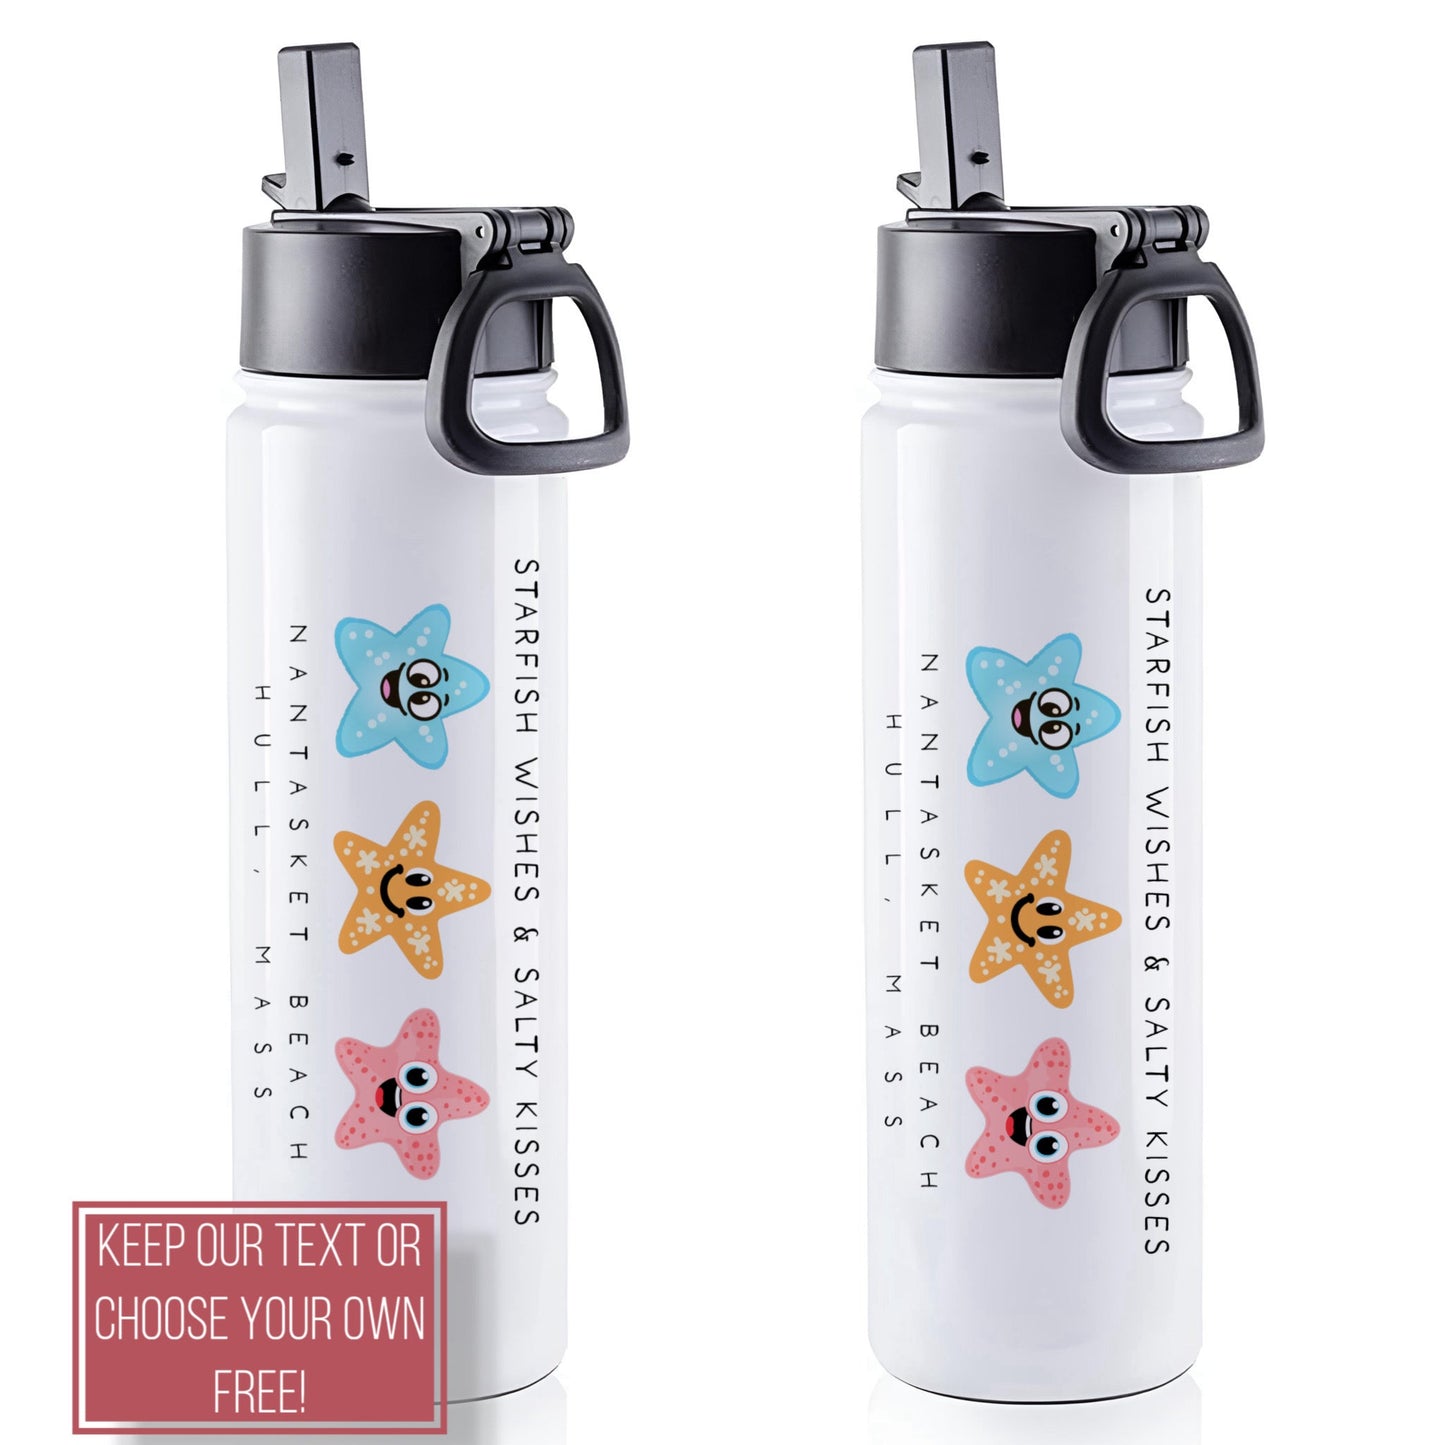 Personalize Free Hull MA, 22oz Stainless Steel Water Bottle from Baby Squid Ink 